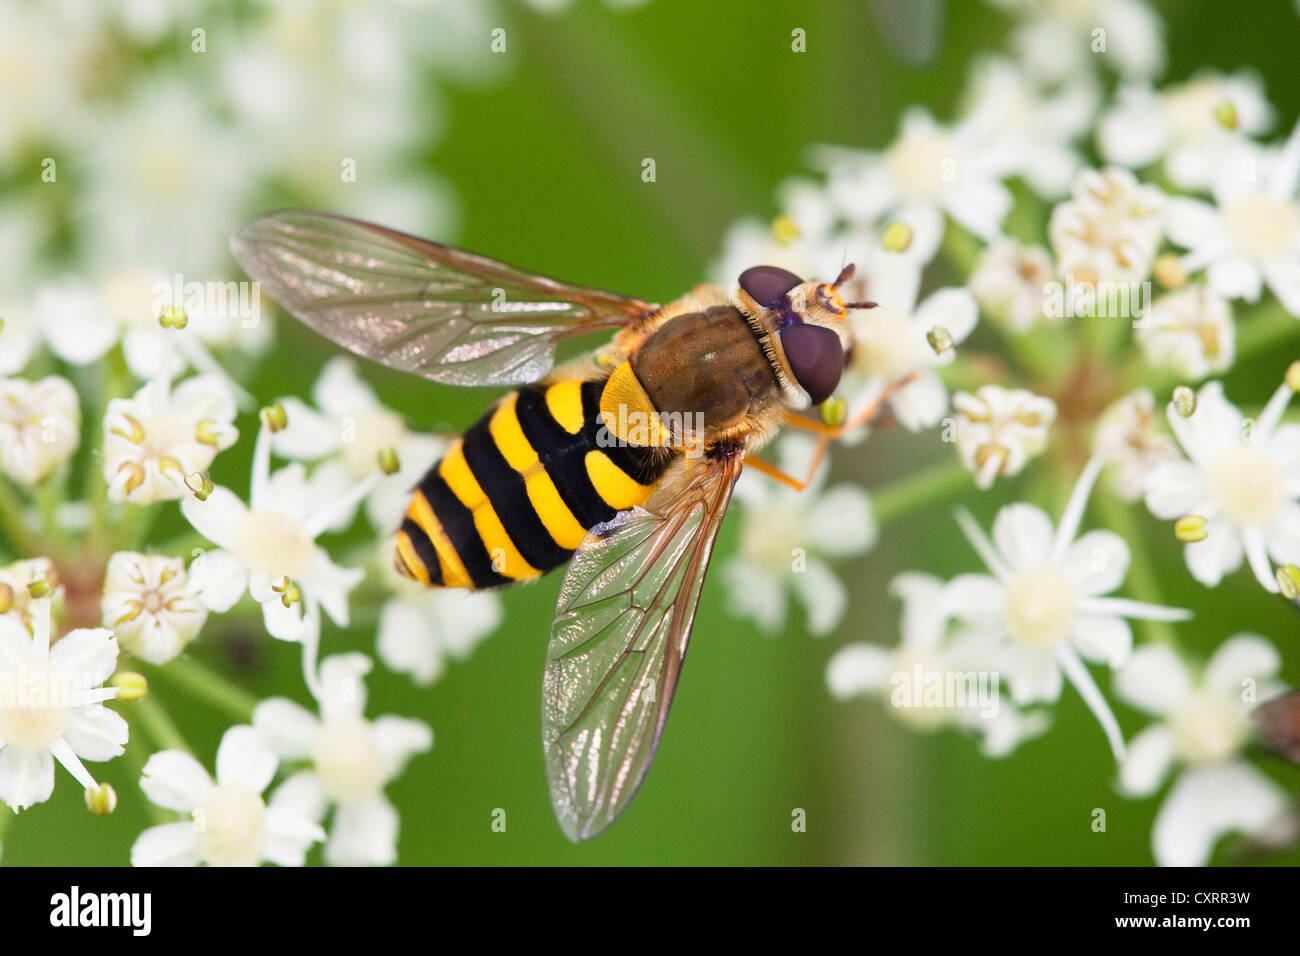 European species of hoverfly (Syrphus ribesii) perched on a plant of the order Umbelliflorae, Bavaria, Germany, Europe Stock Photo